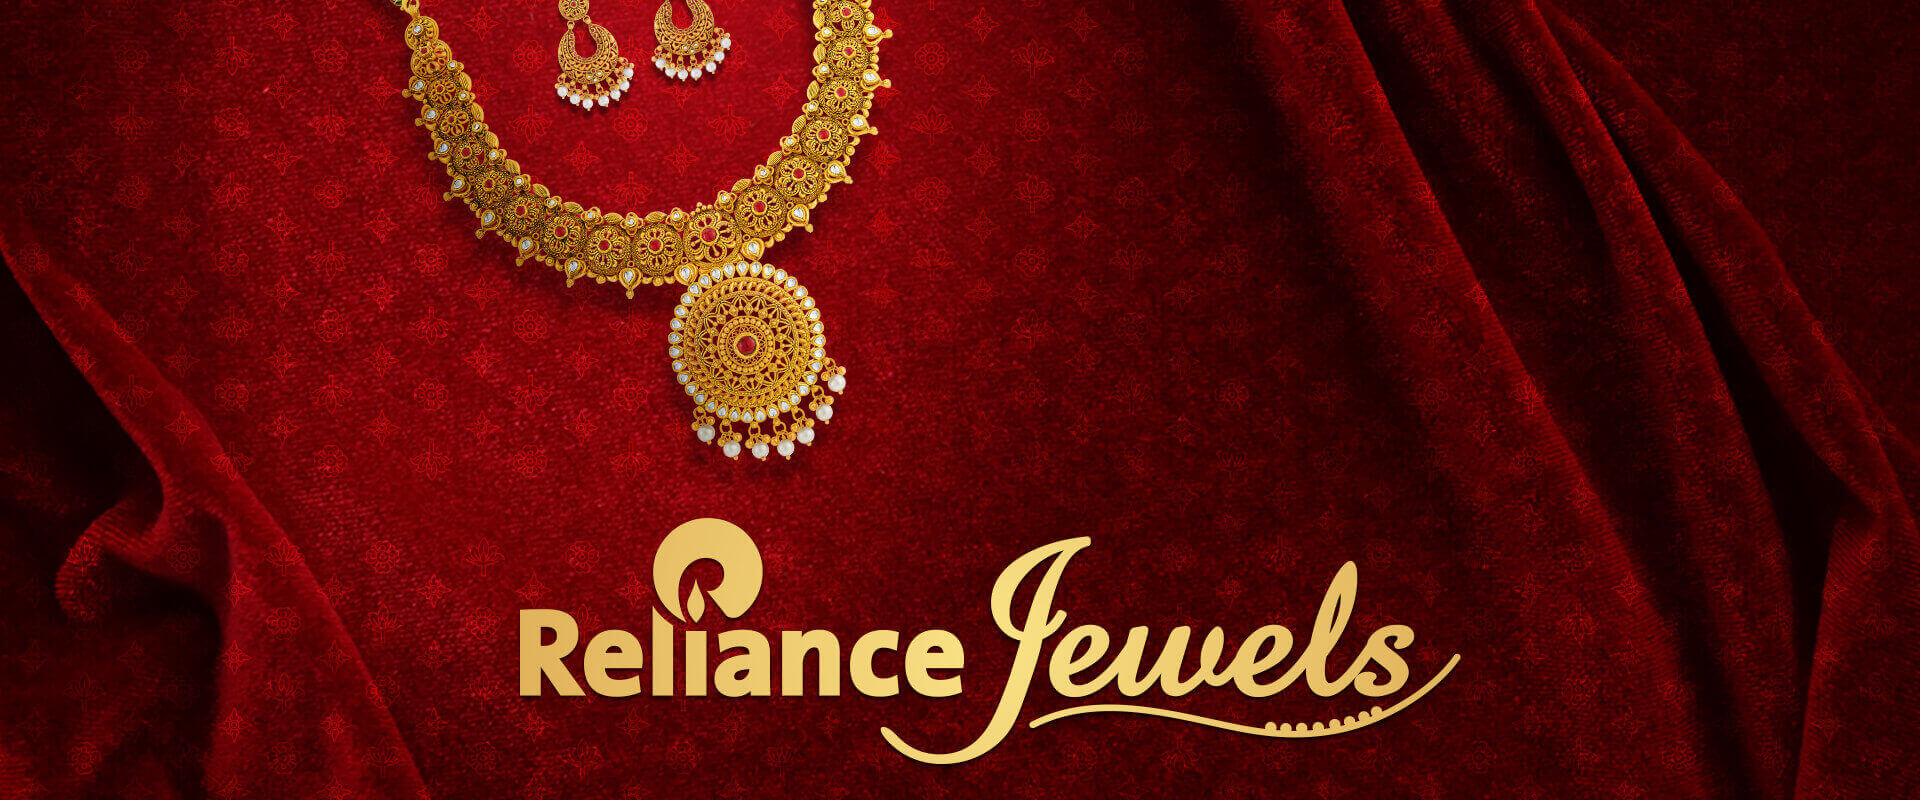 Reliance jewels embraces the Makar Sankranti with an exquisite collection -  The Samikhsya